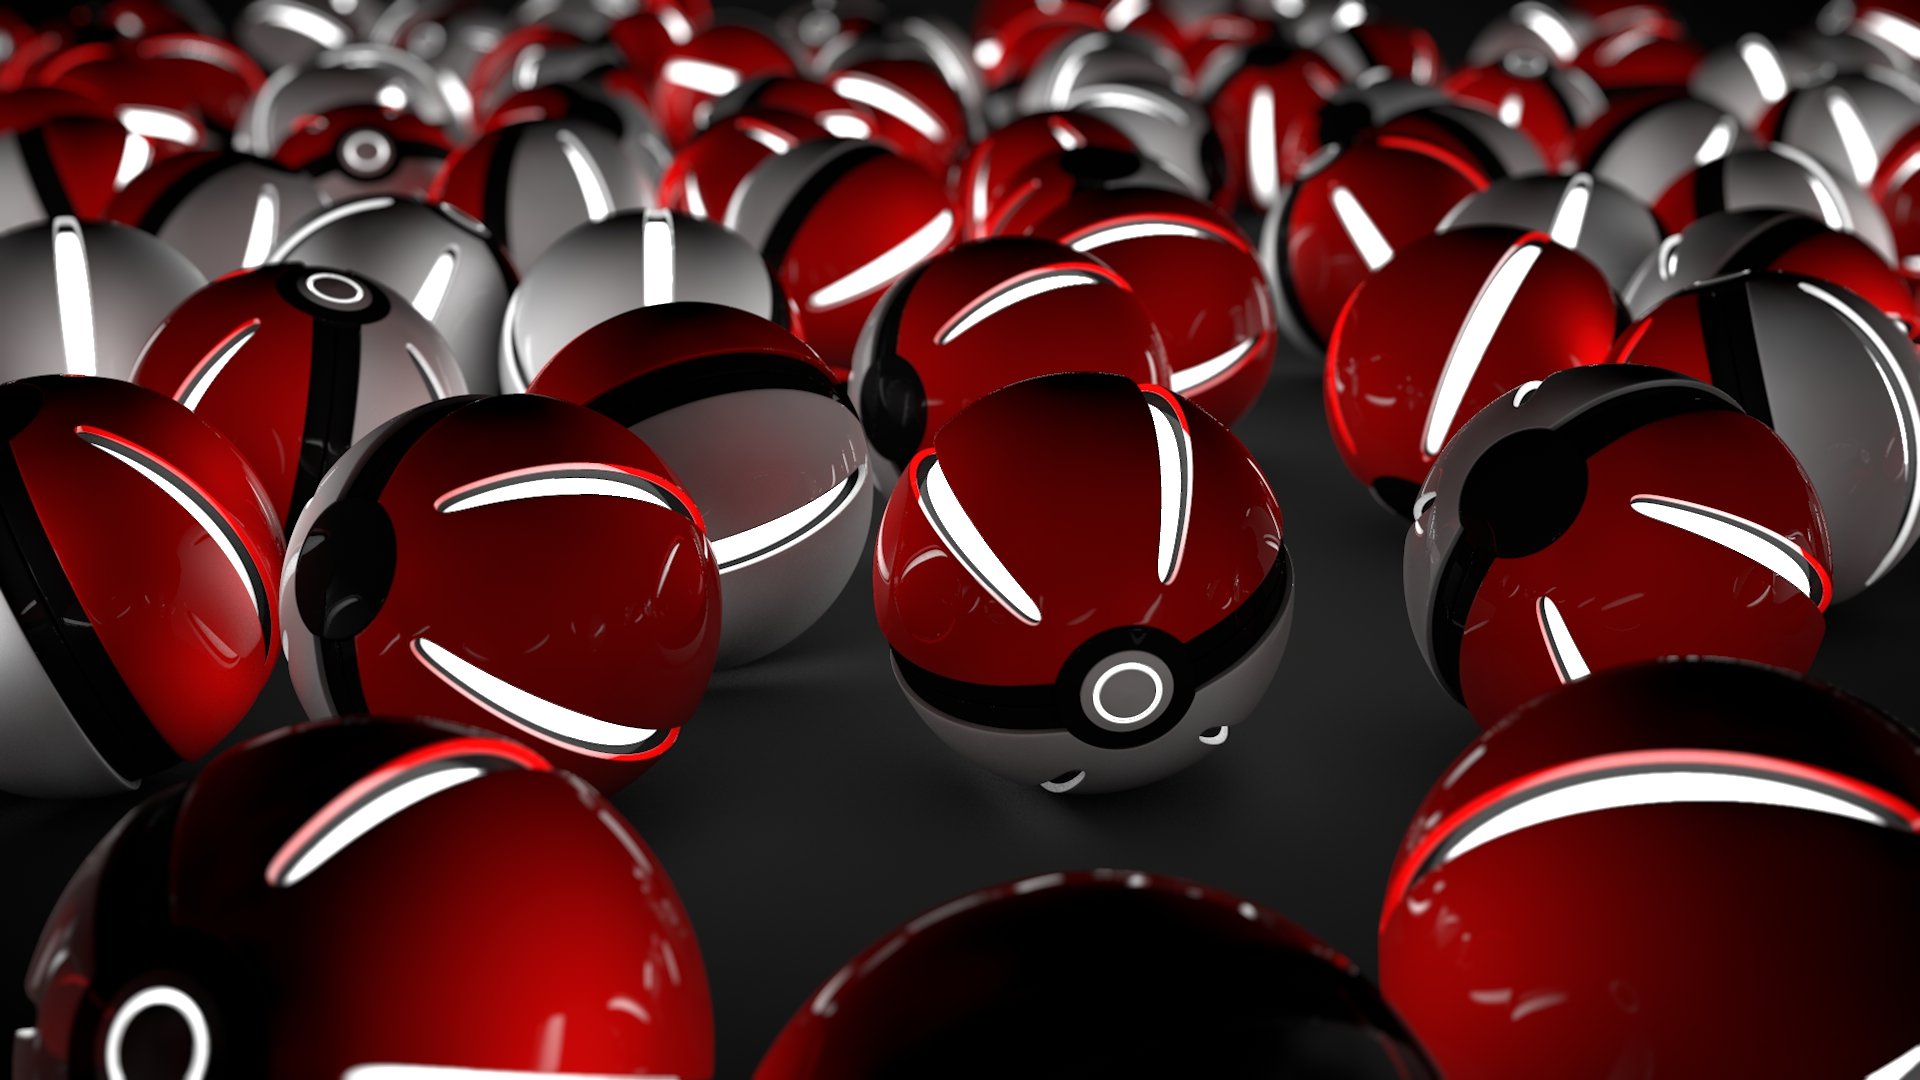 Download hd 1920x1080 Pokeball PC background ID:278693 for free